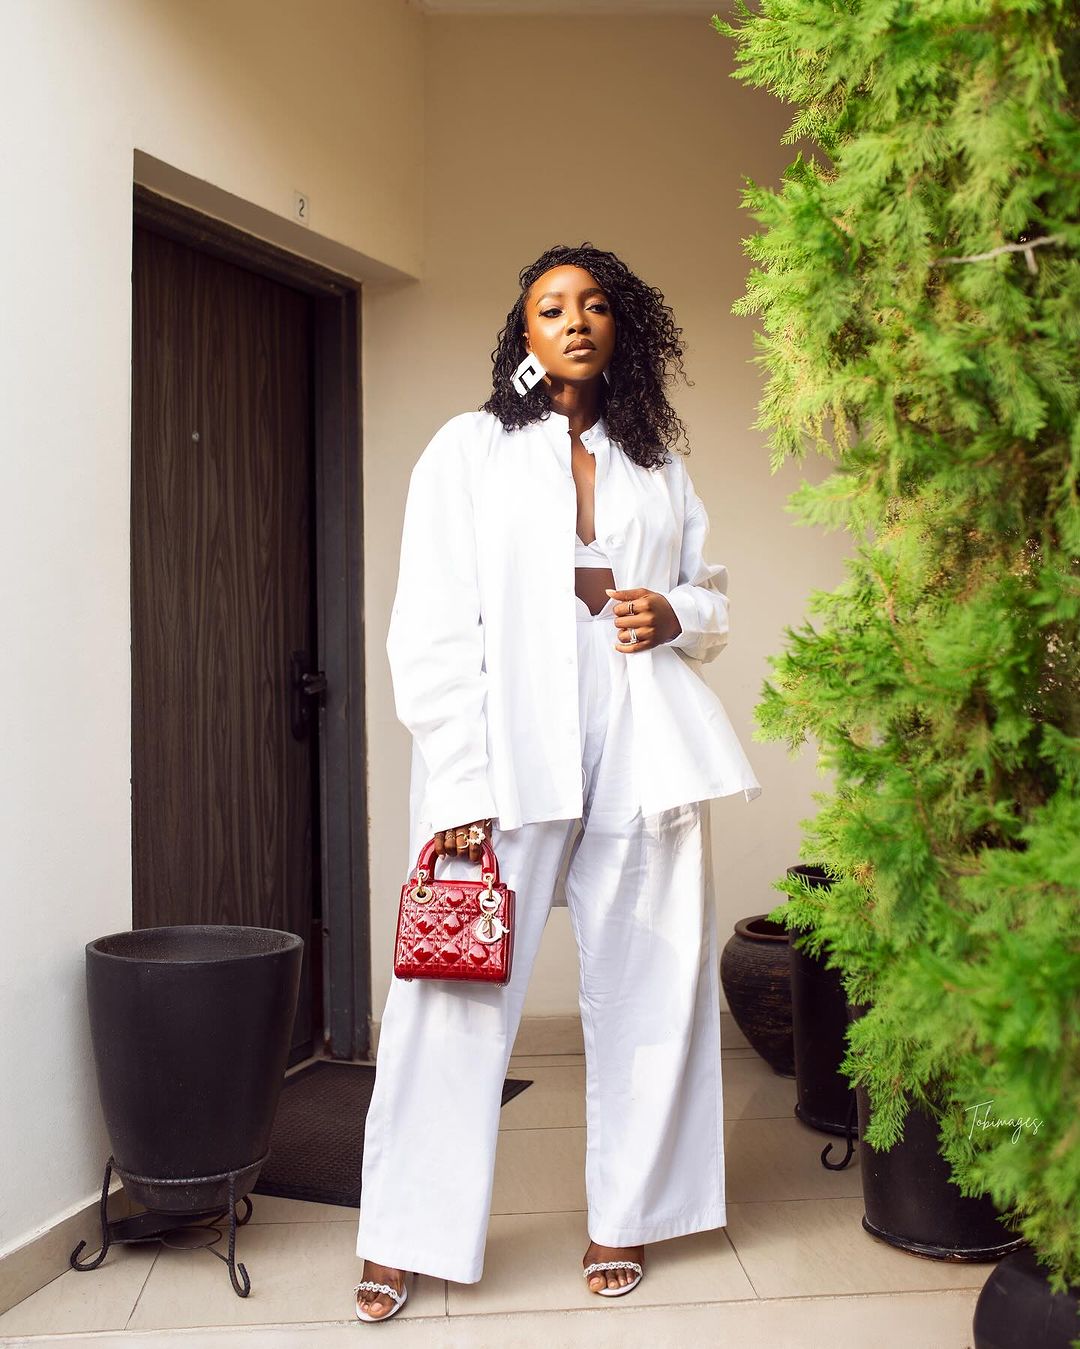 lagos-lately: Cool Looks From A Tribe Called Judah Premiere And Others